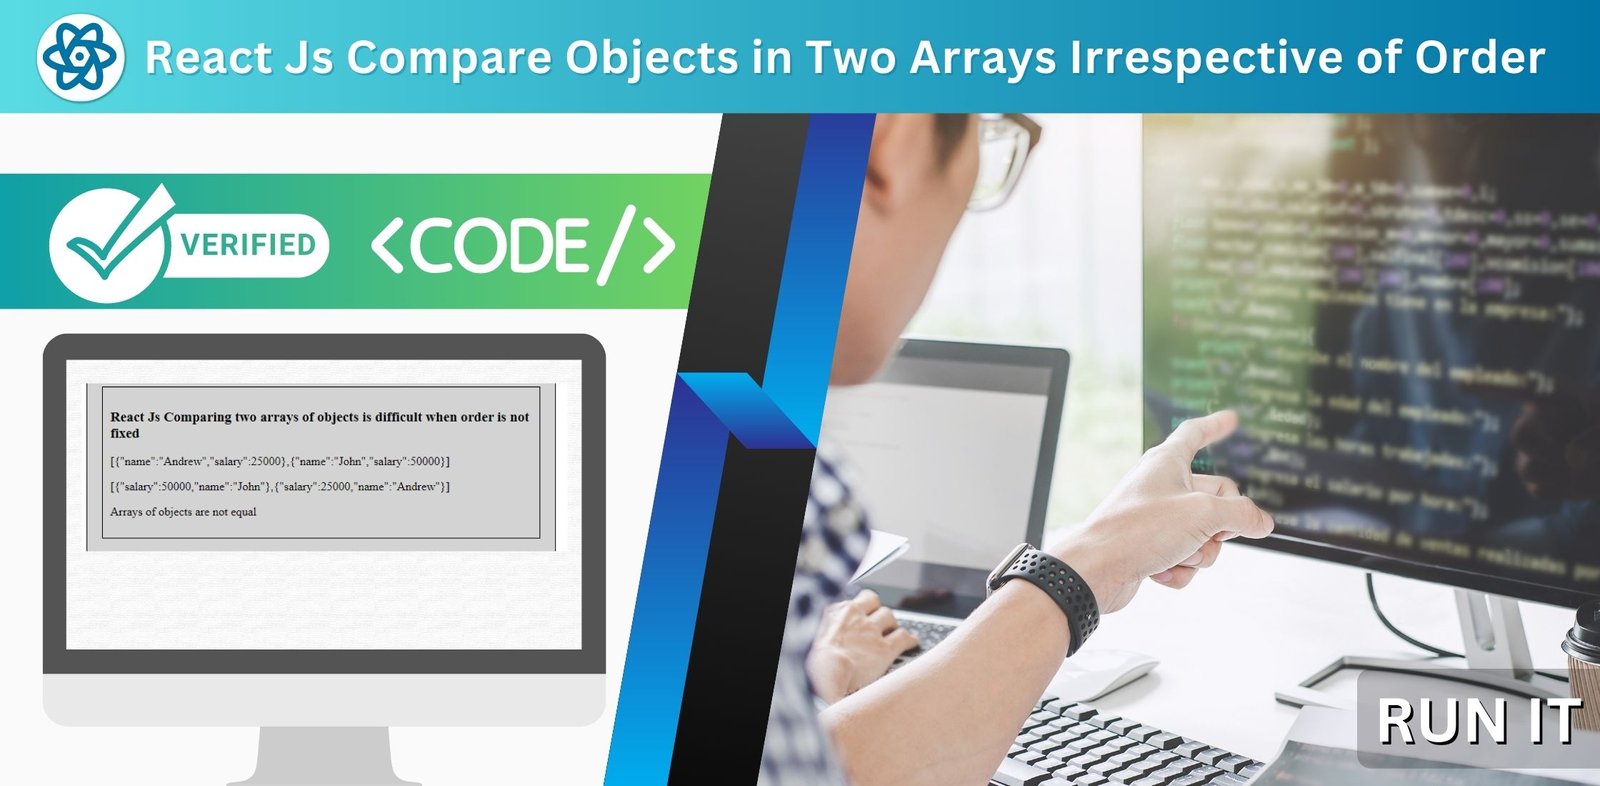 React Js compares two arrays of objects irrespective of order